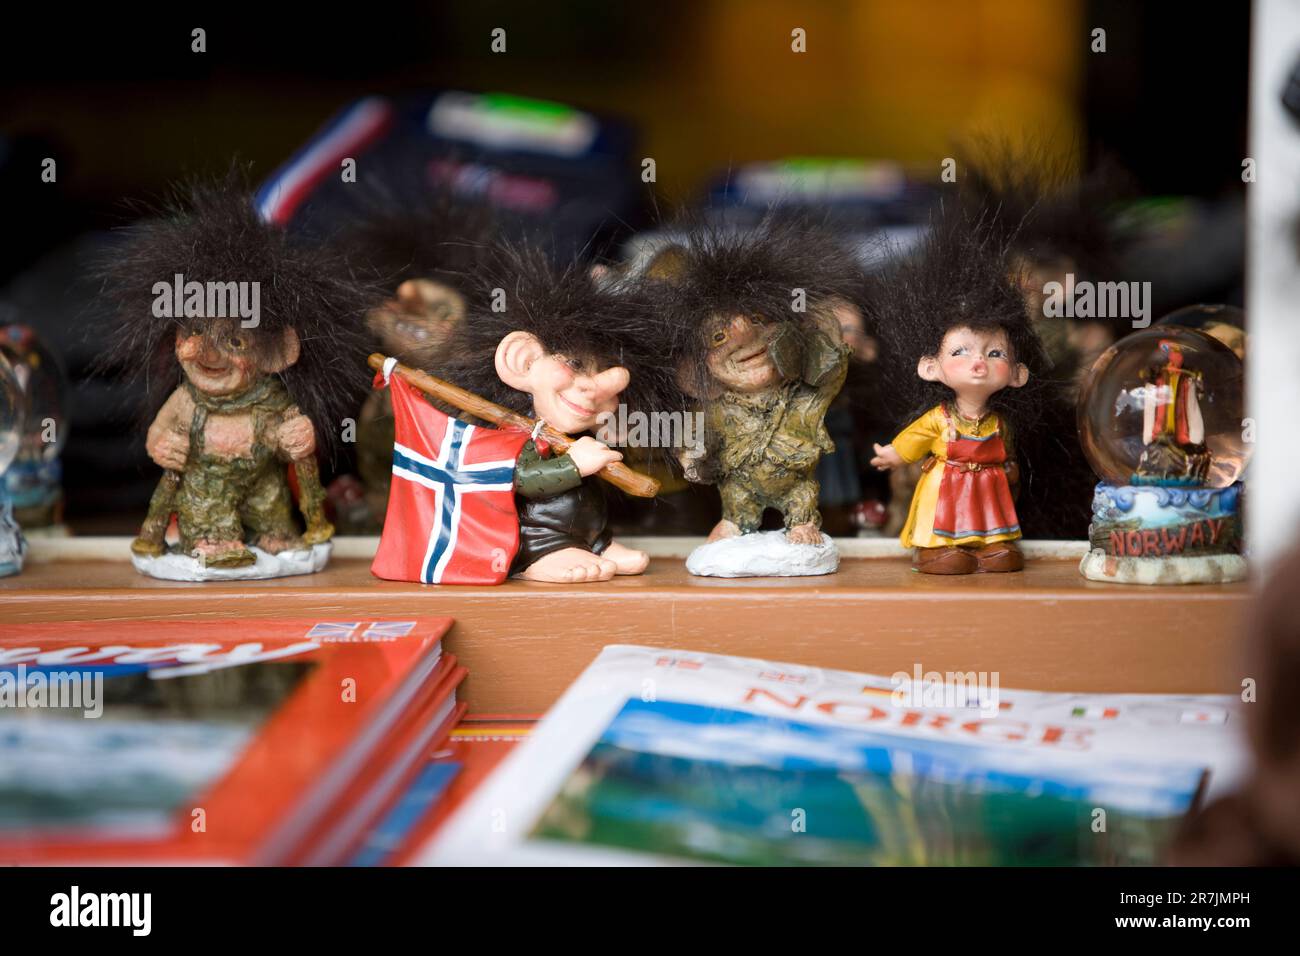 Toy trolls for sales to tourists who visit Norway. A troll is a member of a race of fearsome creatures from Norse mythology. Stock Photo